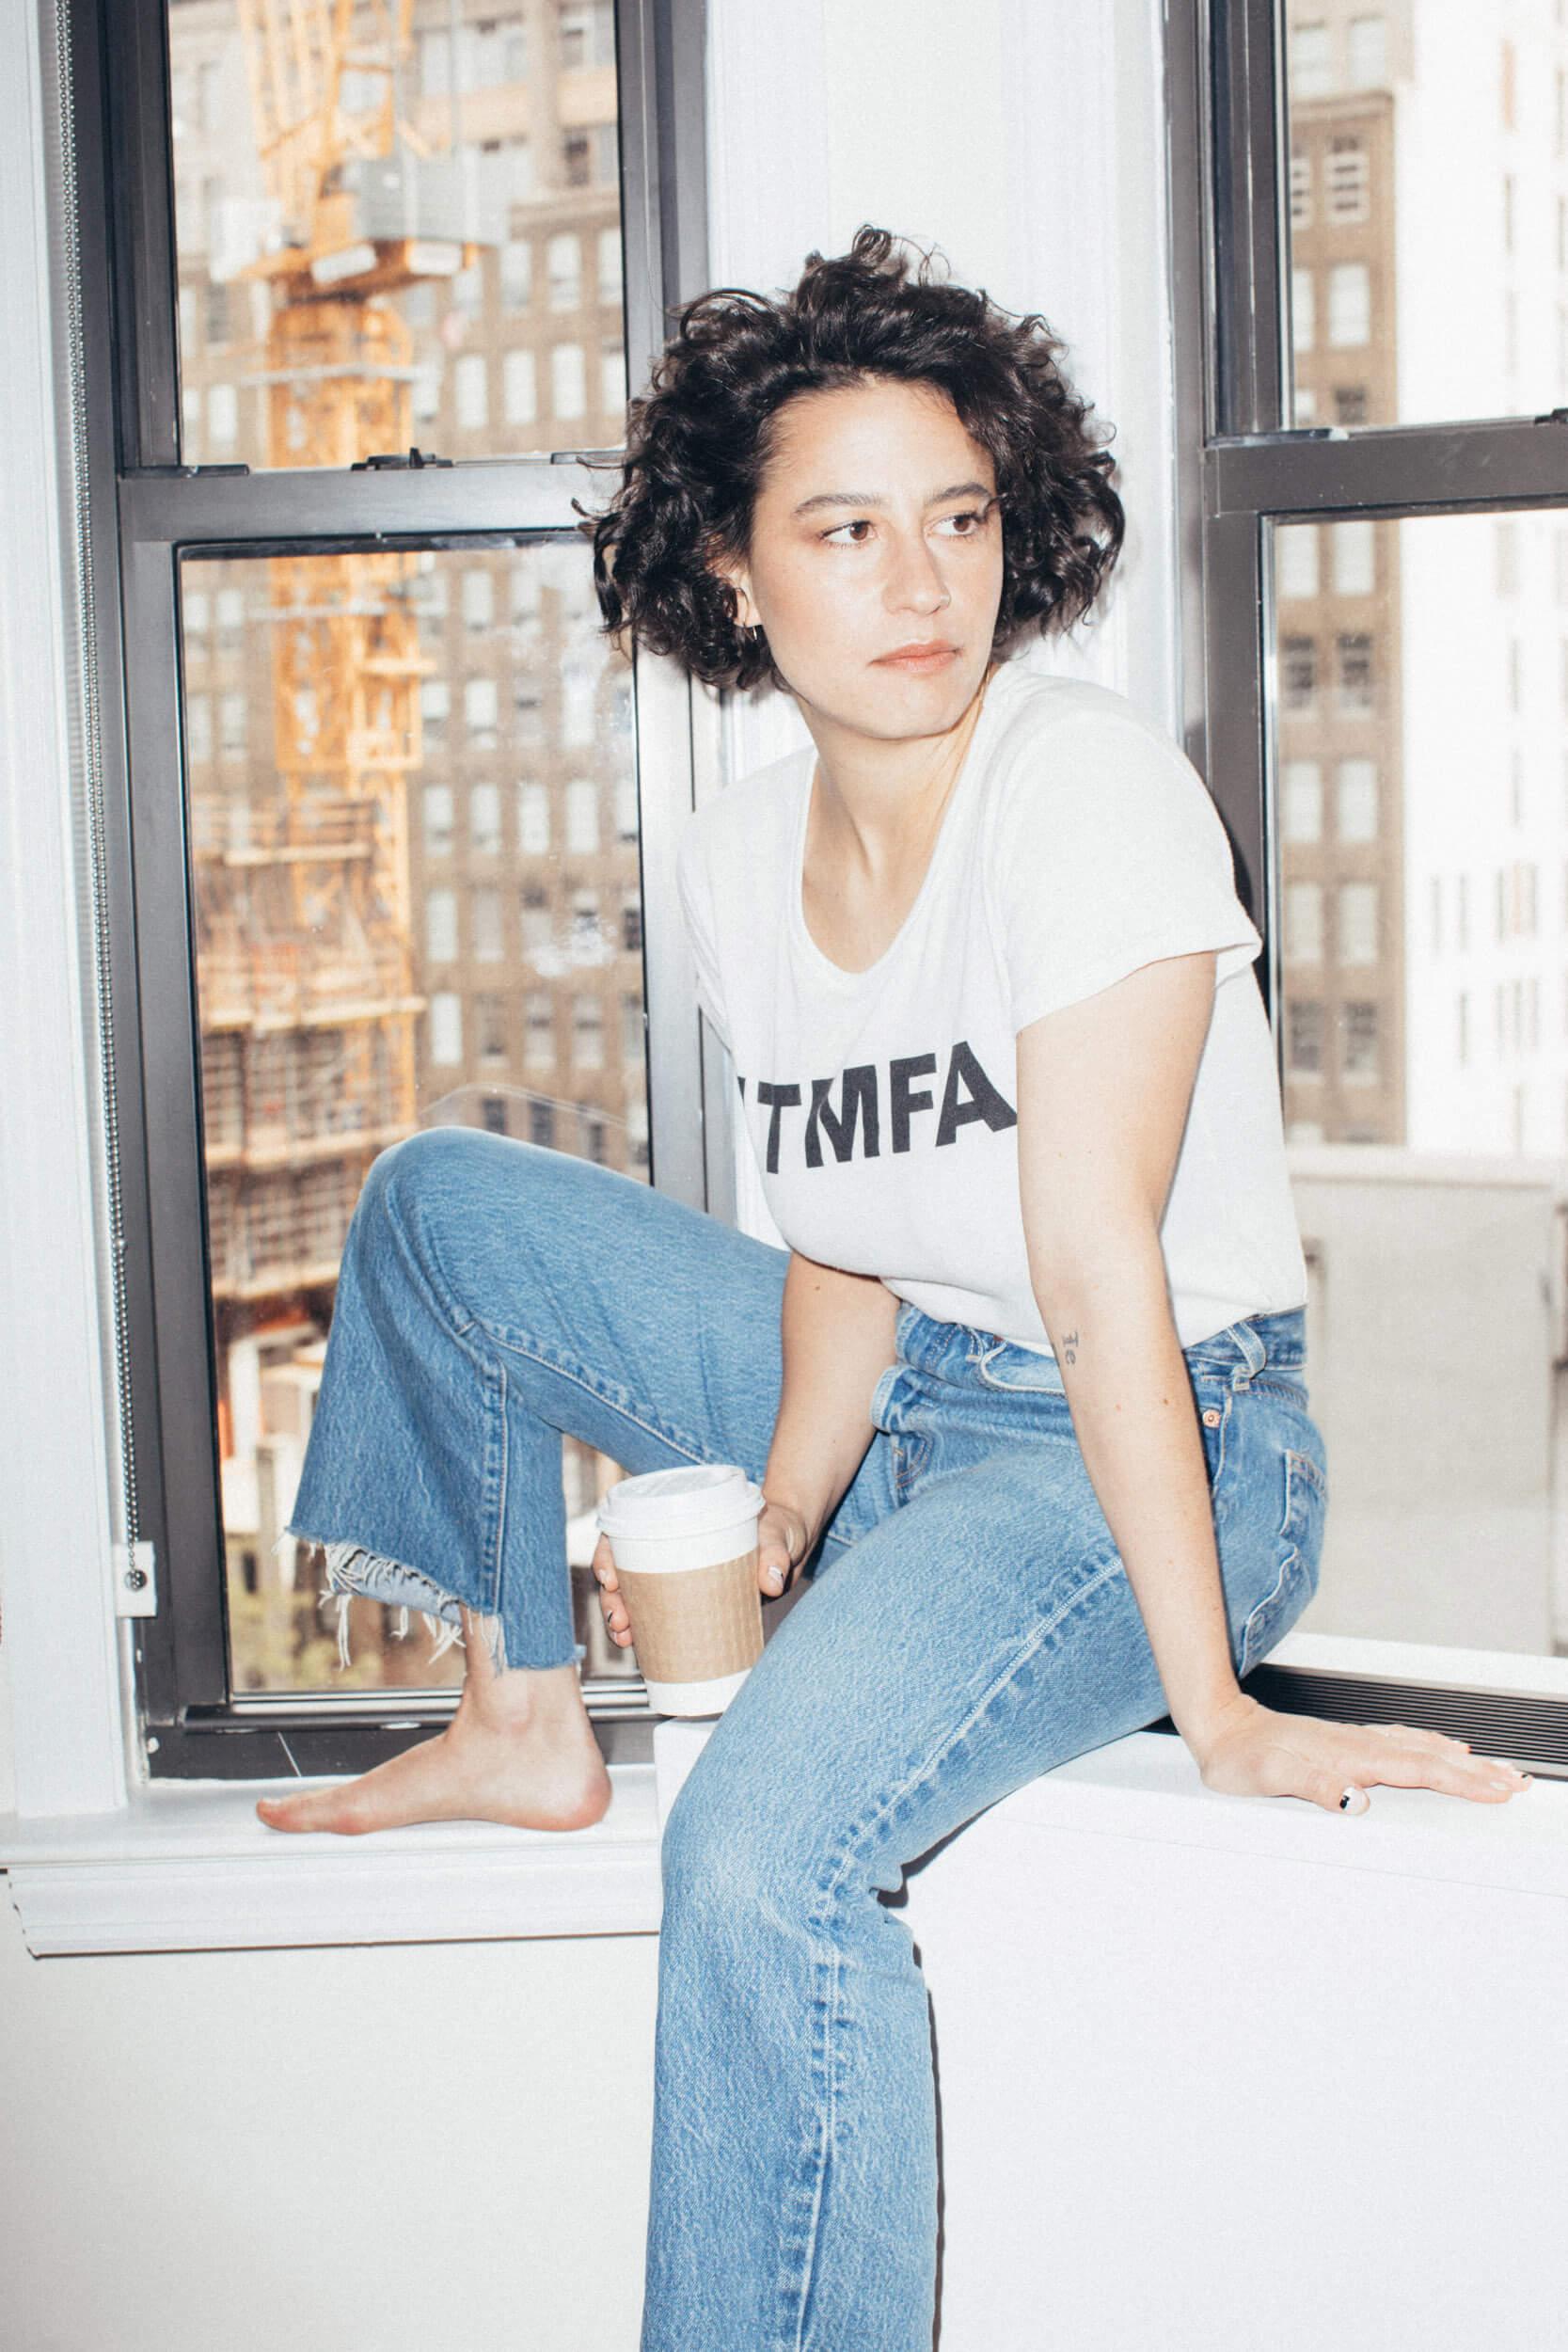 Hot Picture Of Ilana Glazer Which Are Going To Make You